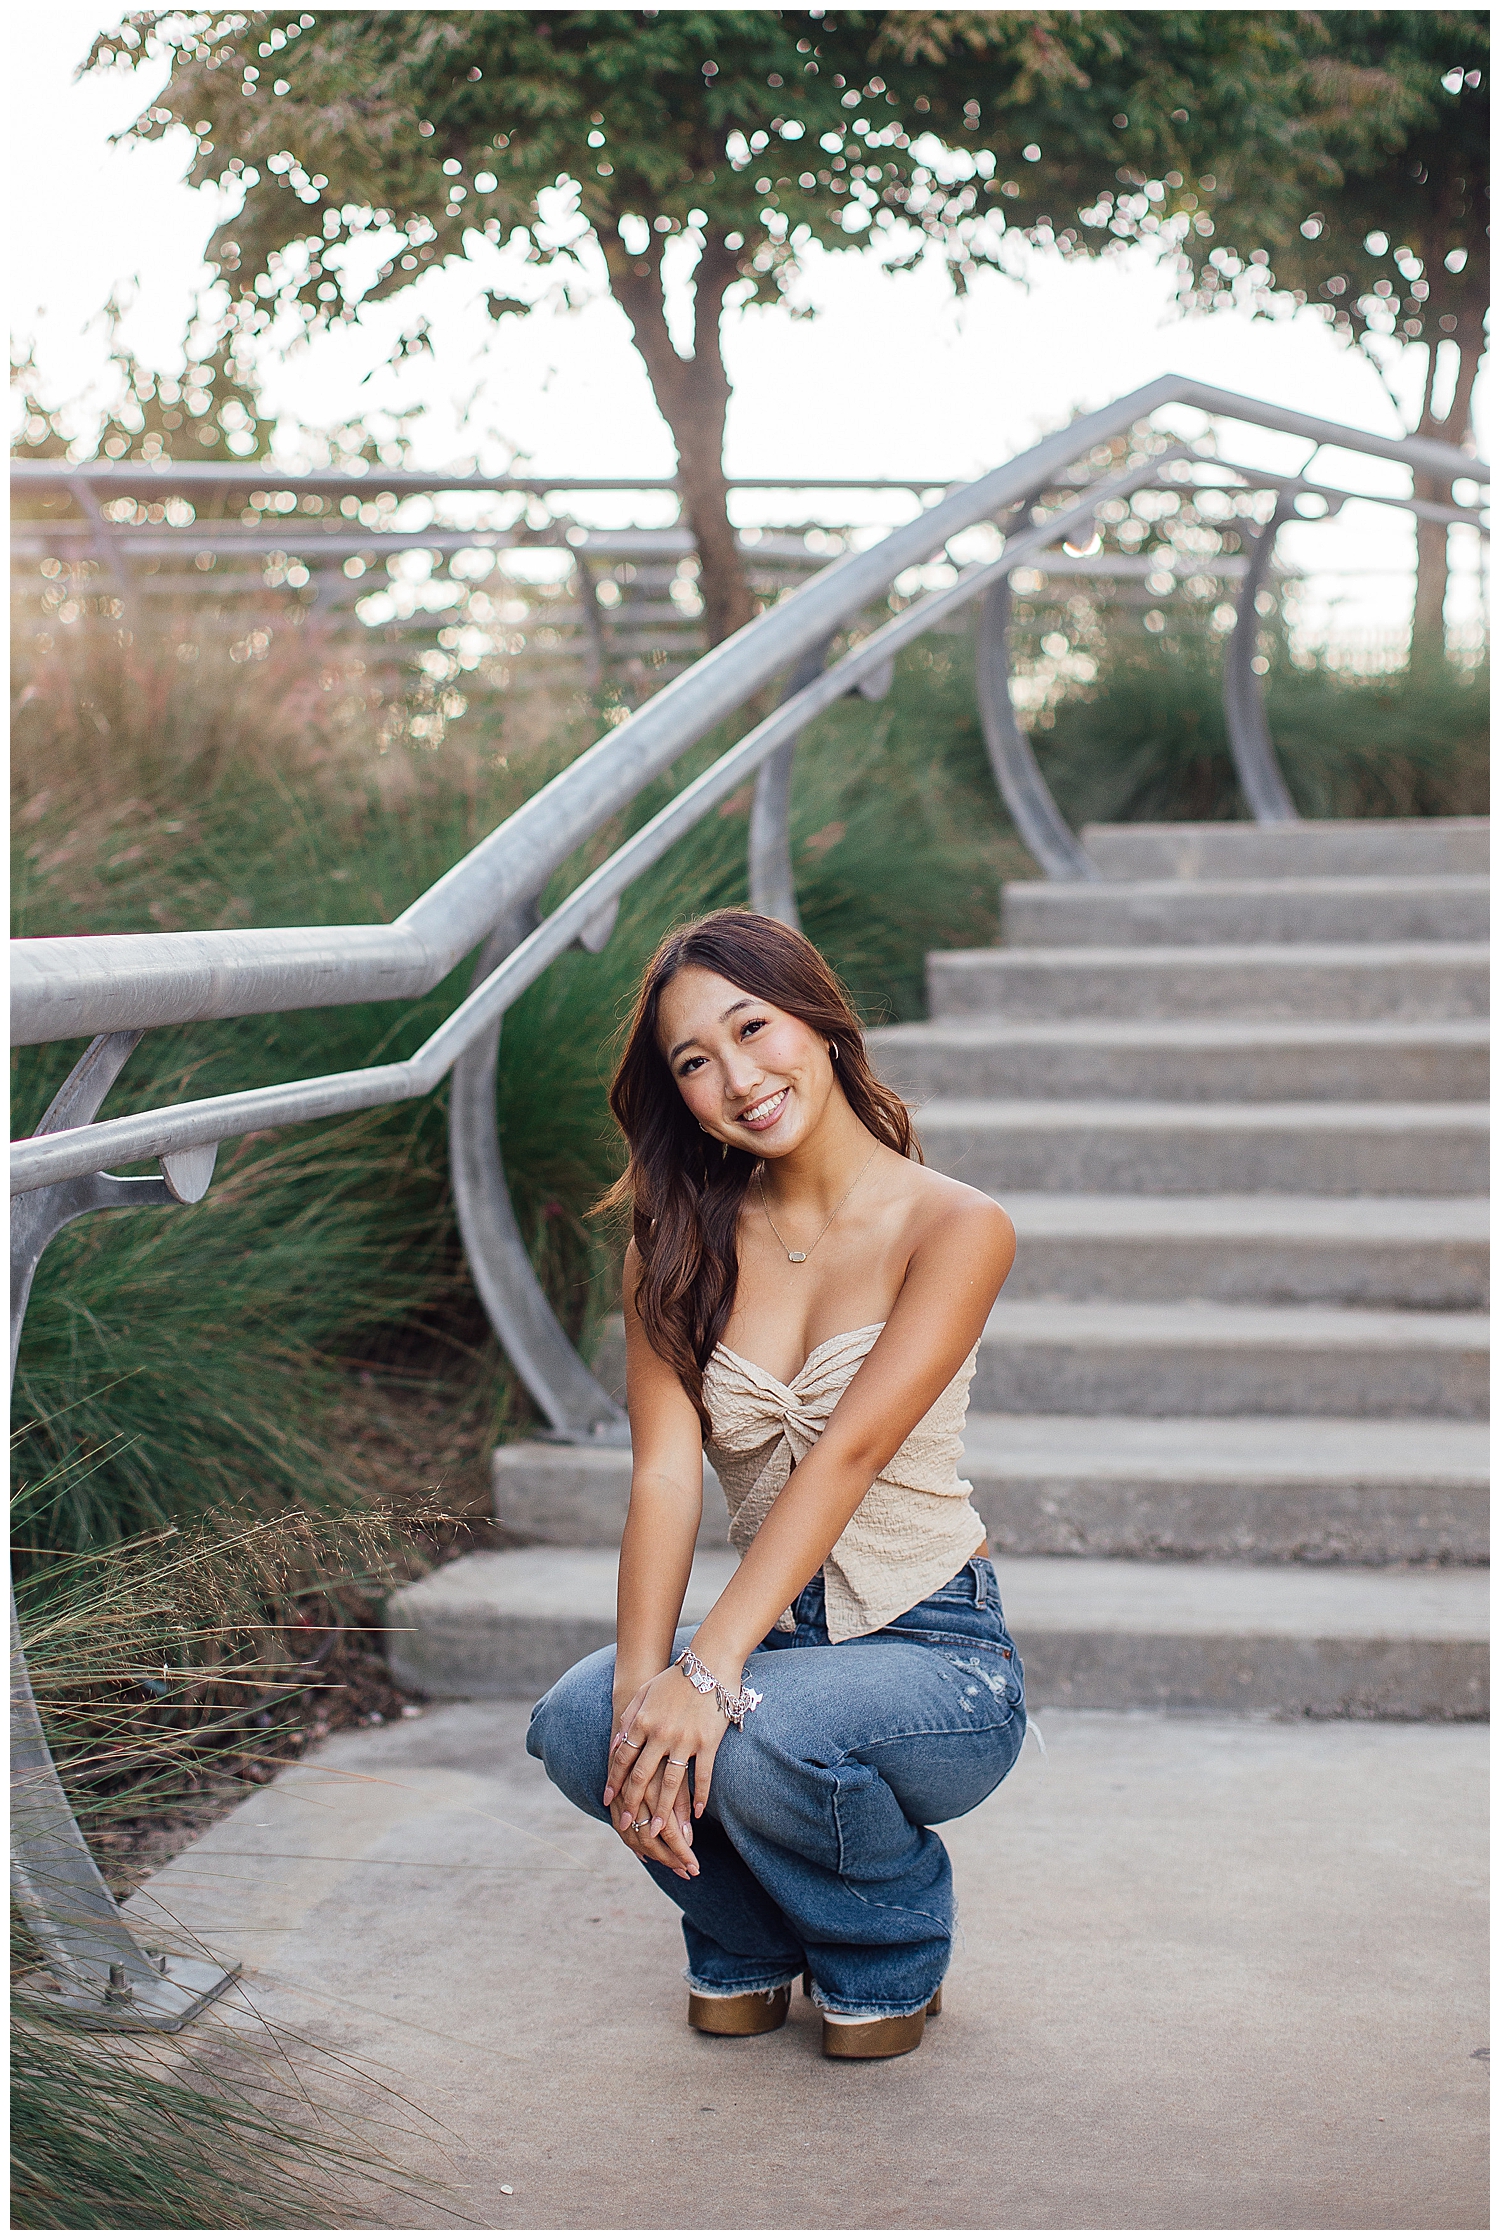 Fun senior pictures Houston downtown with girl squatting in jeans on a staircase outdoors